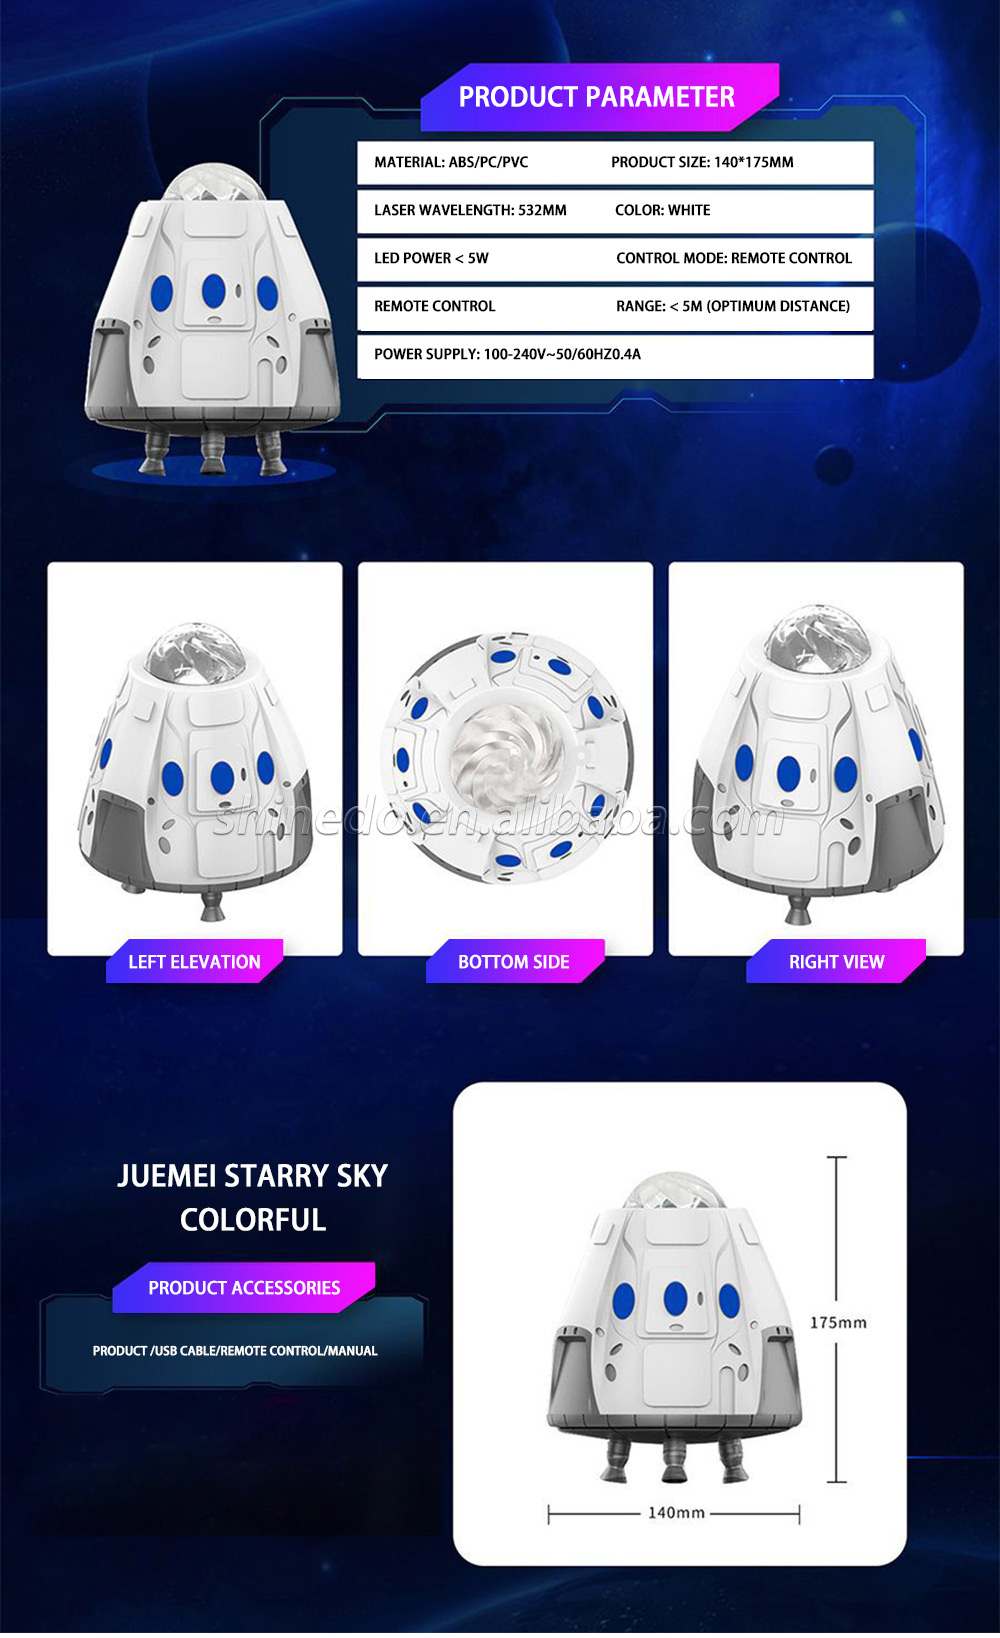 LED Space capsule Cosmic Aurora bedroom romantic atmosphere projection light lamp Bluetooth speaker Galaxy projector